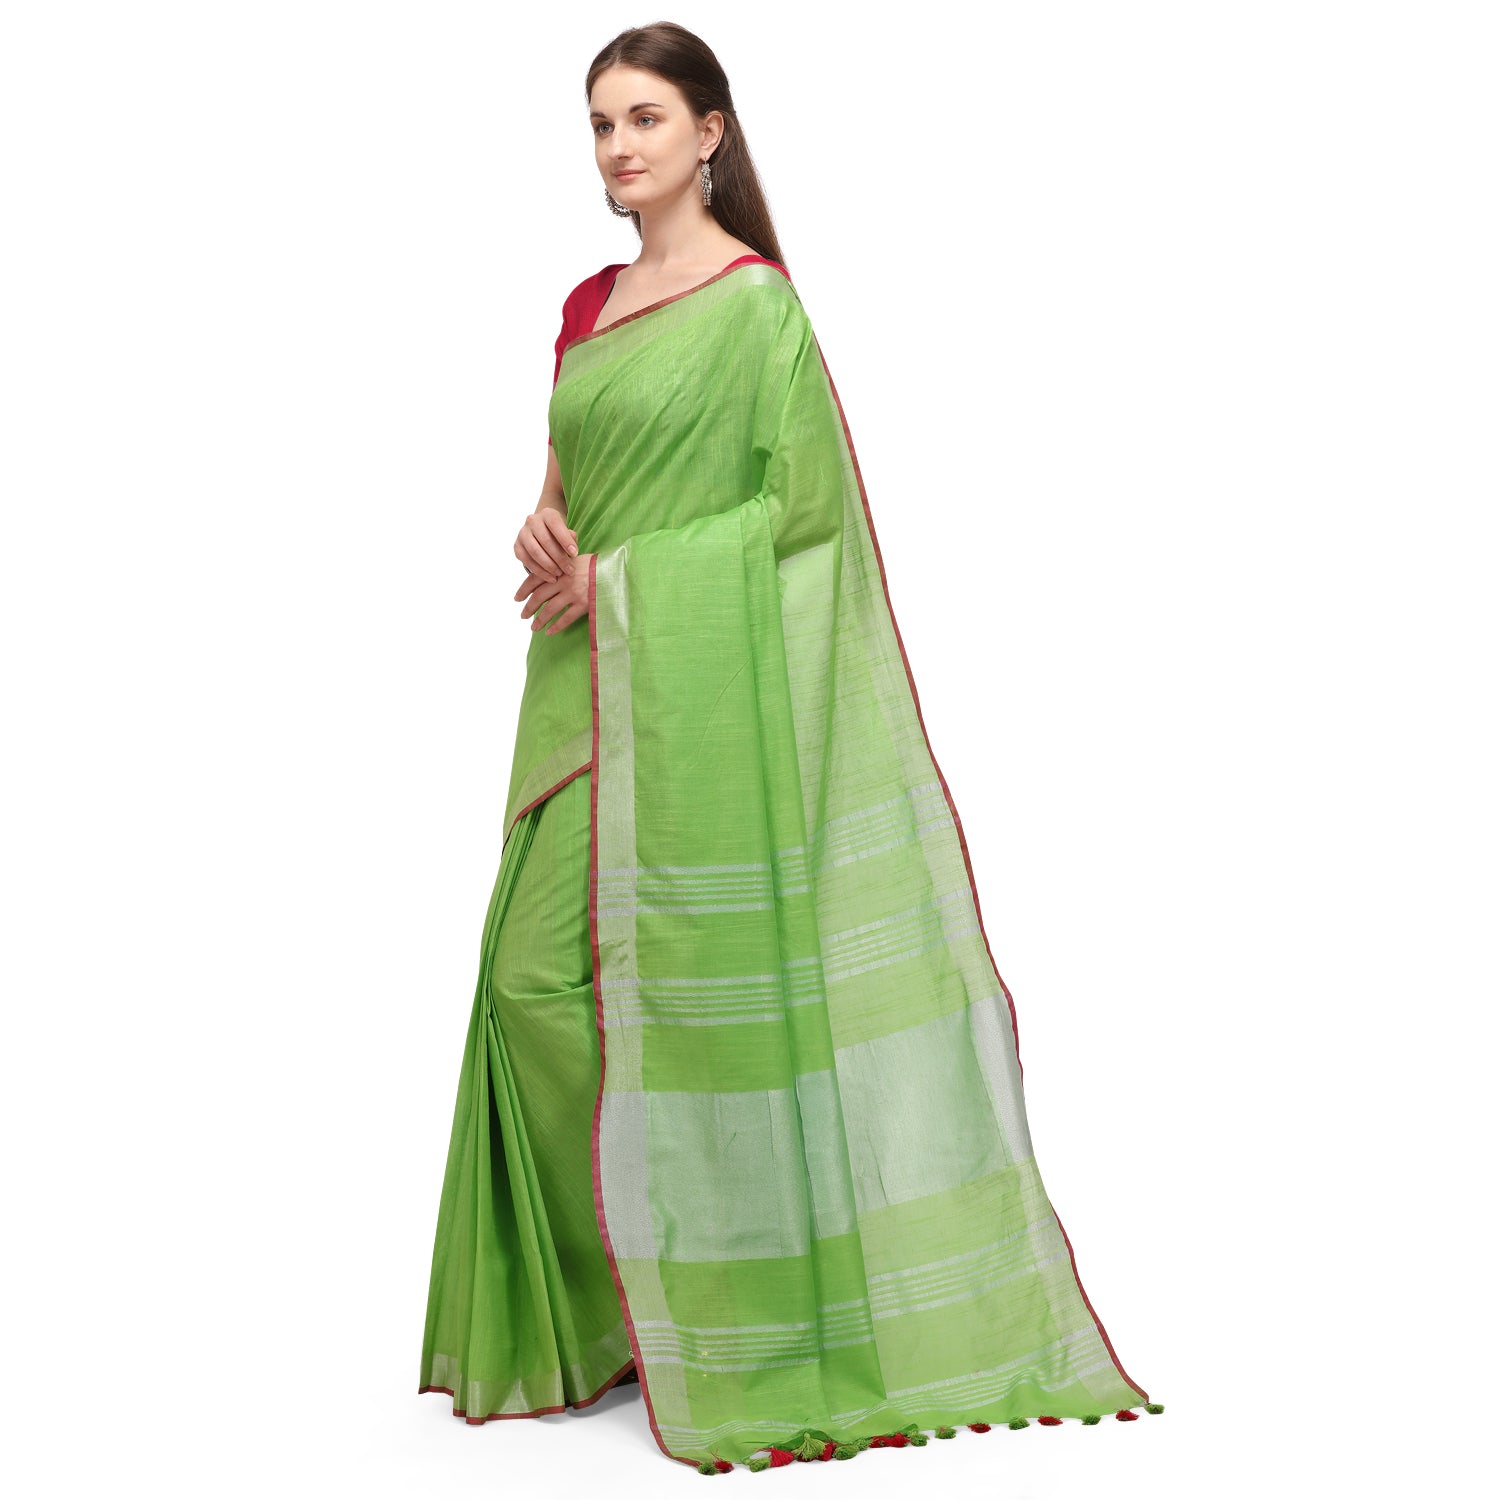 Women's self Woven Solid Textured Daily Wear Cotton Linen Sari With Blouse Piece (Light Green) - NIMIDHYA